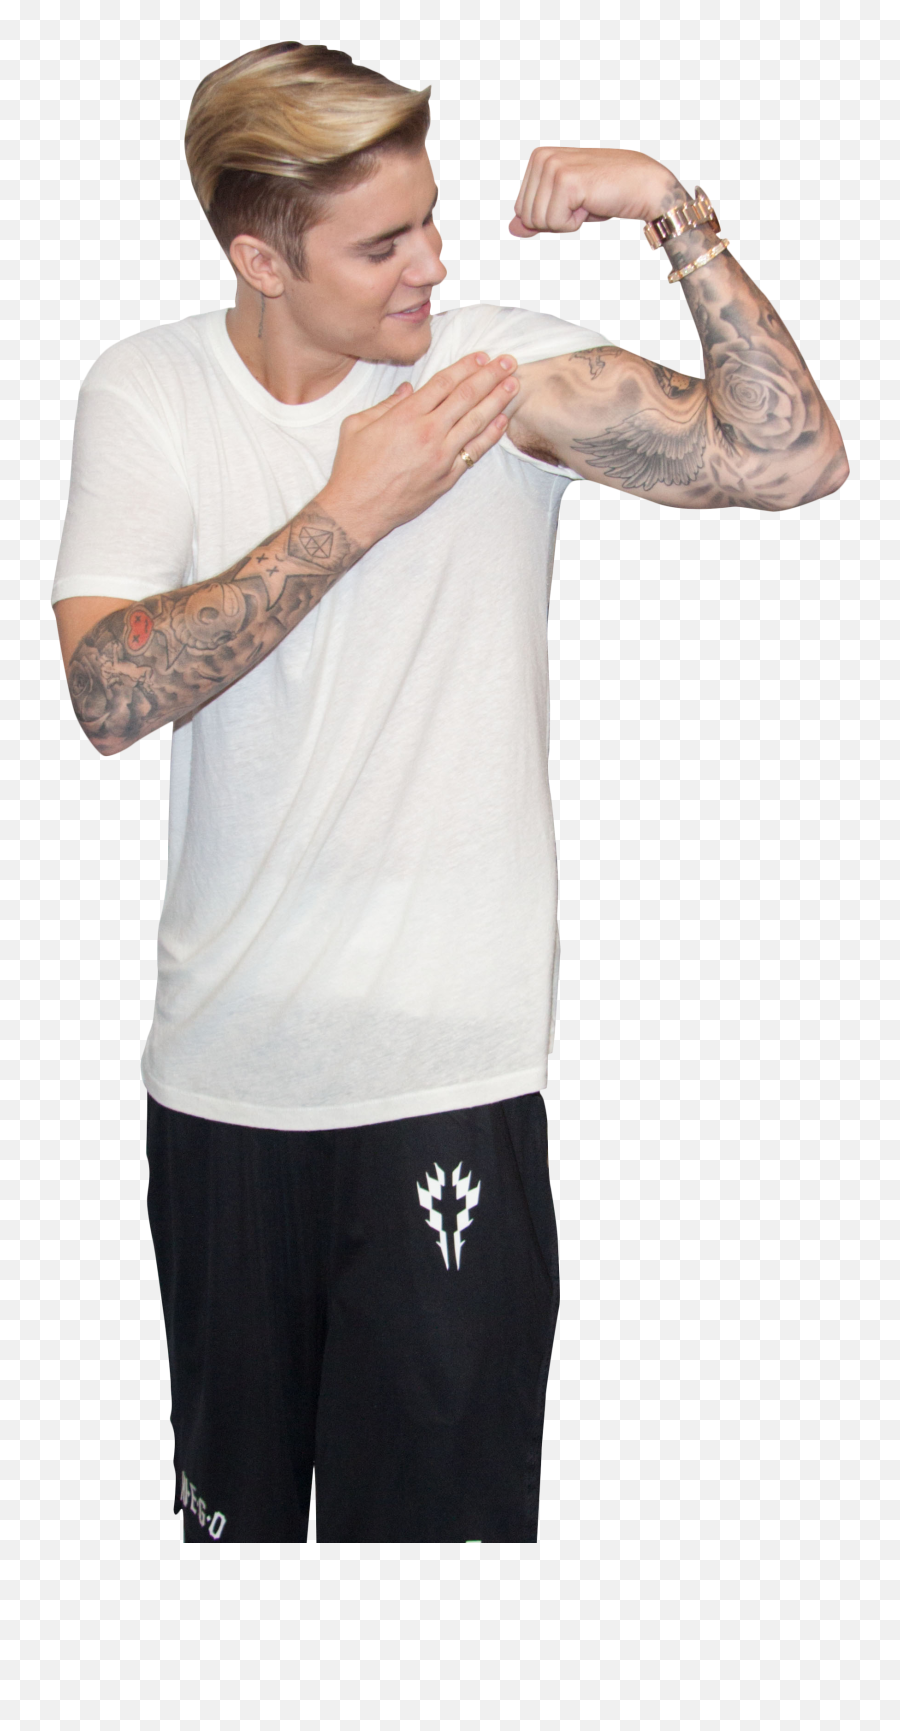 Download Justin Bieber Showing Muscle Png Image For Free - Justin Bieber Sleeves Rolled Up,Muscles Png